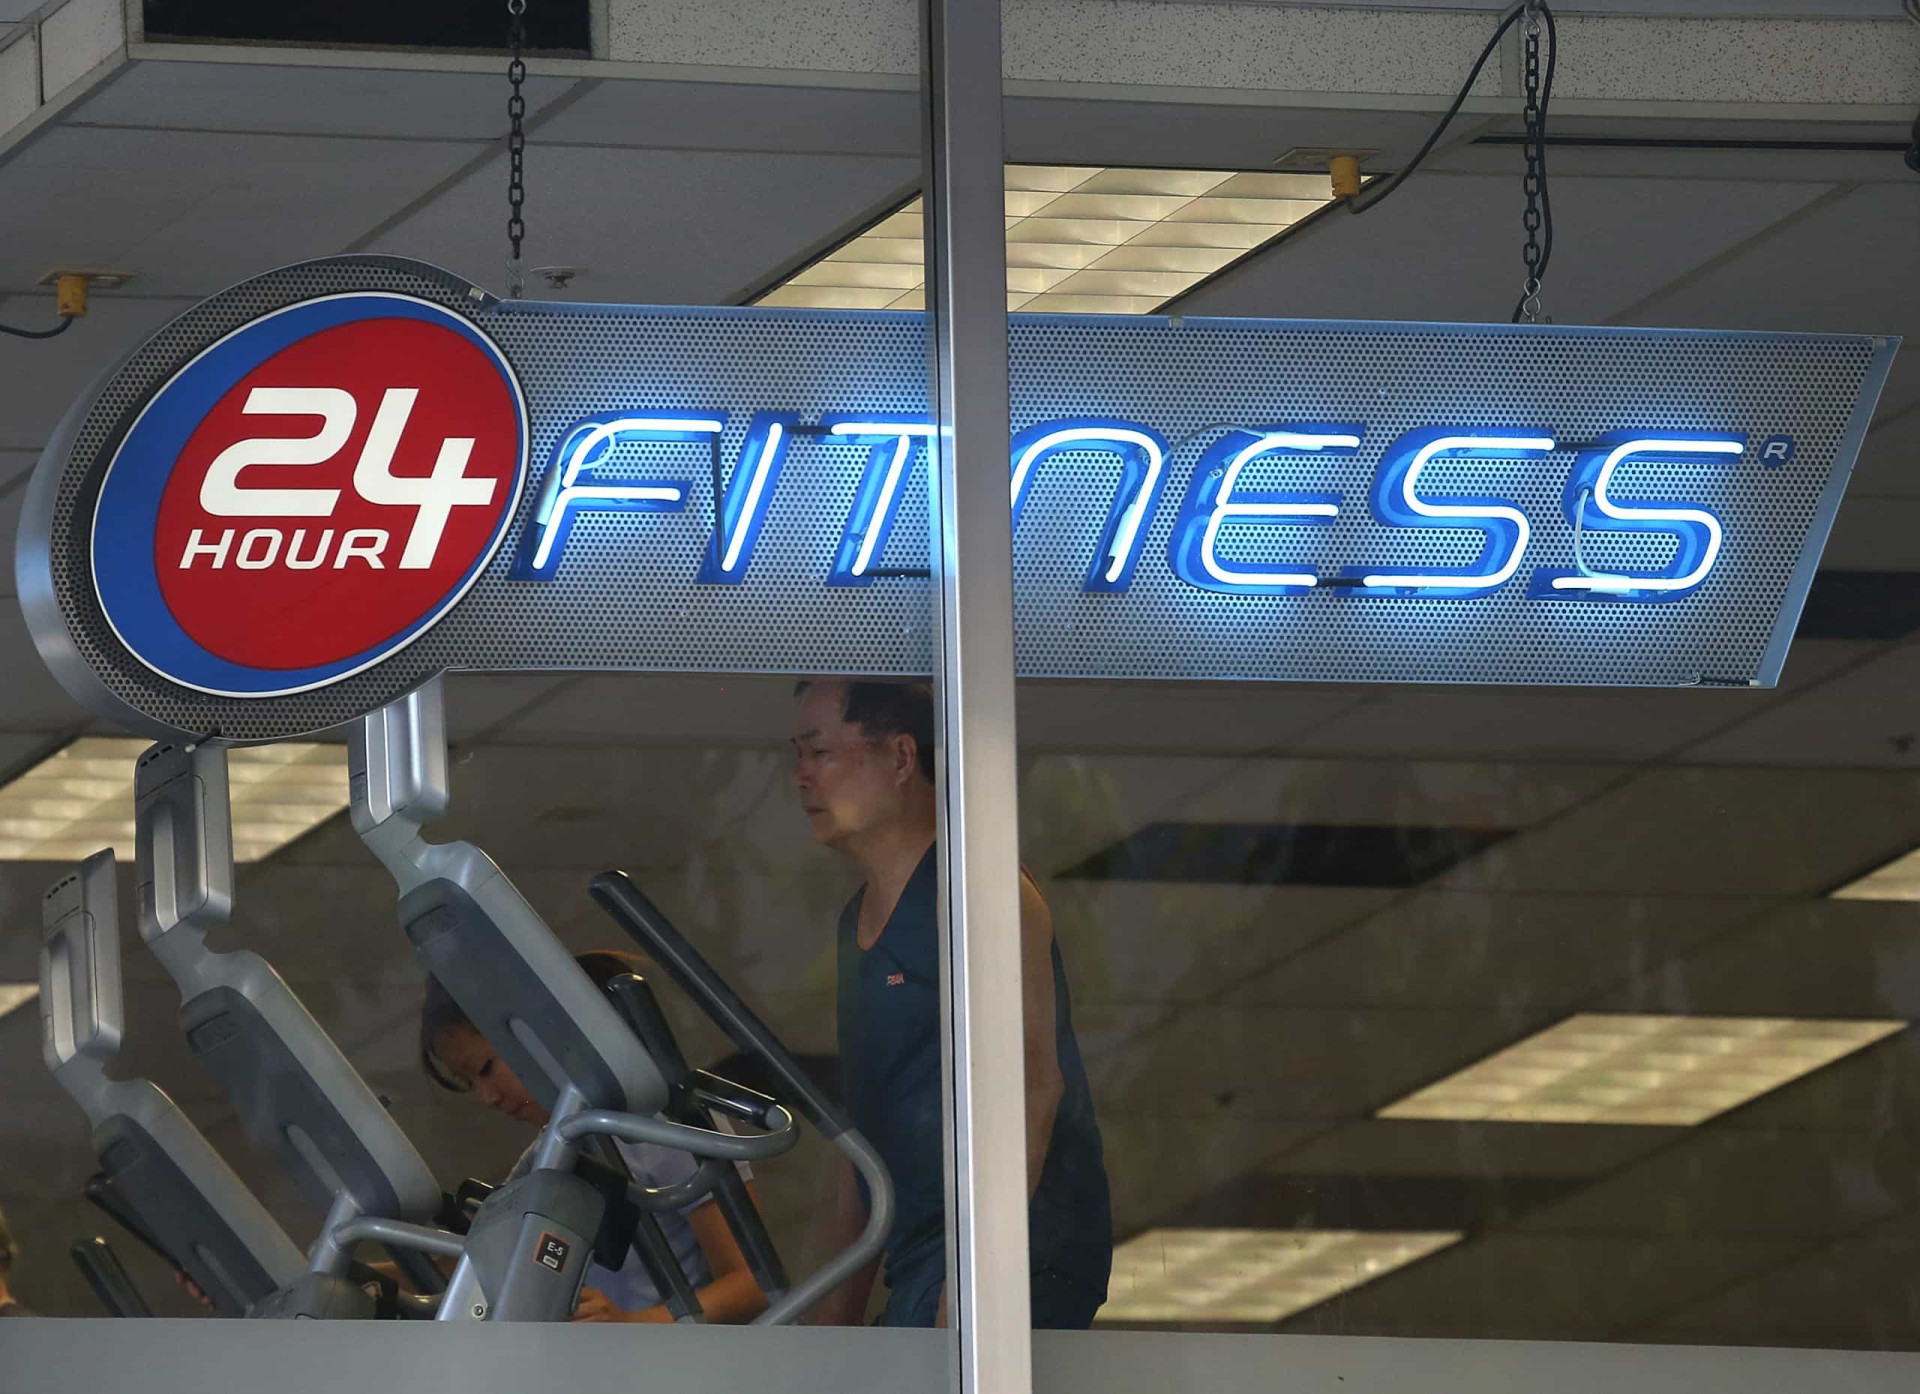 <p>Mark Mastrov opened 24 Hour Fitness in 1983. The pioneers of the innovative concept are currently the second-largest fitness chain in the US, based on revenue.</p>